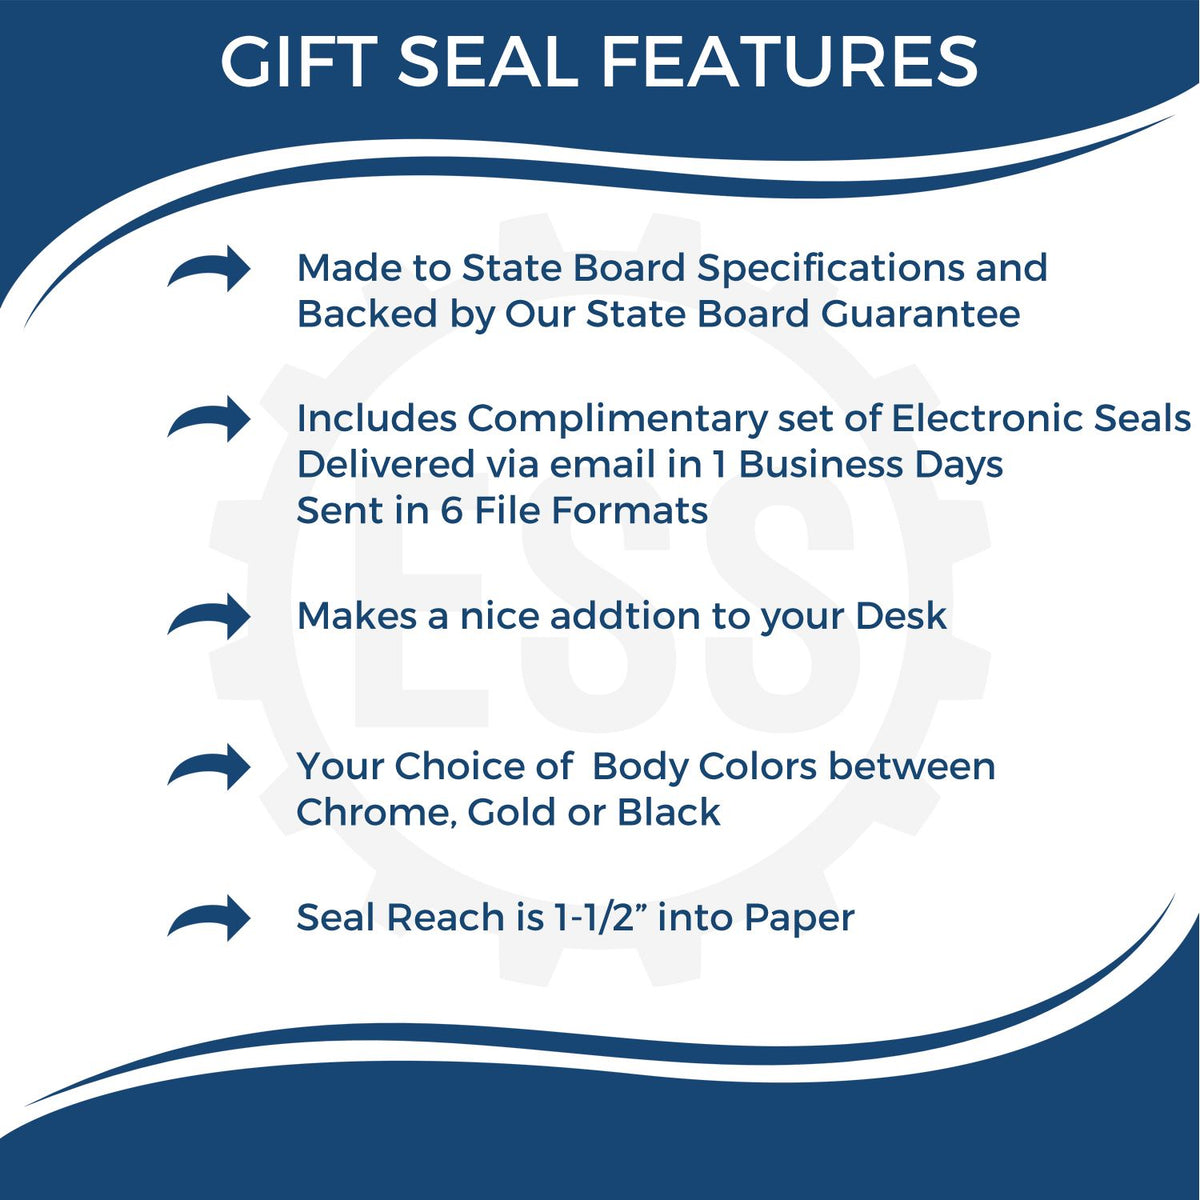 A picture of an infographic highlighting the selling points for the Gift South Dakota Engineer Seal